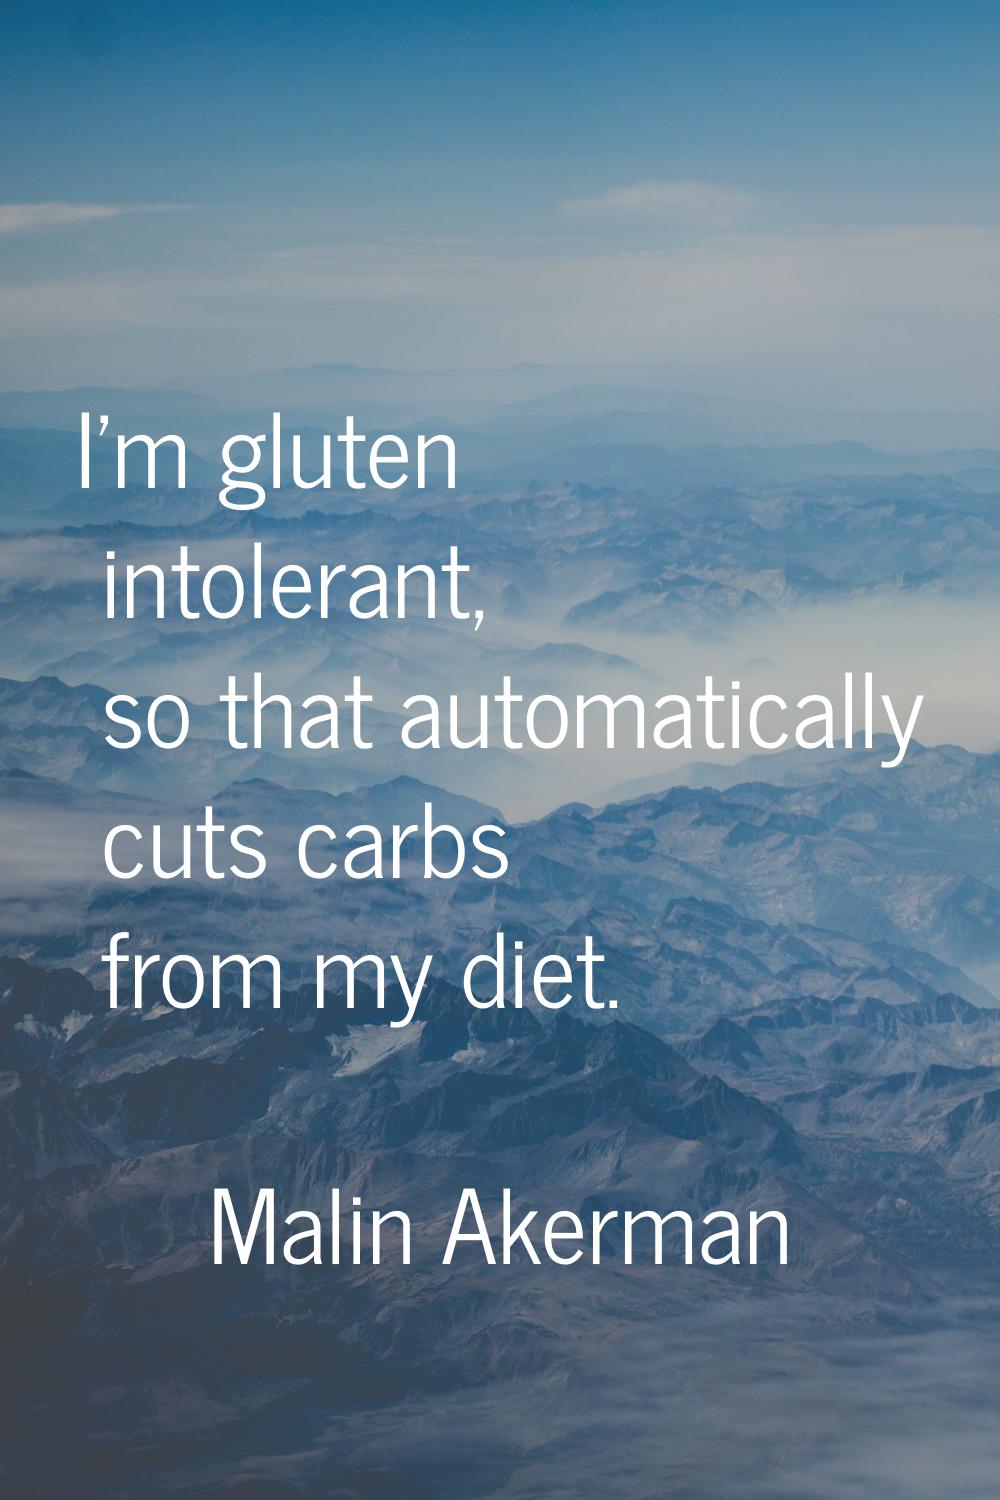 I'm gluten intolerant, so that automatically cuts carbs from my diet.